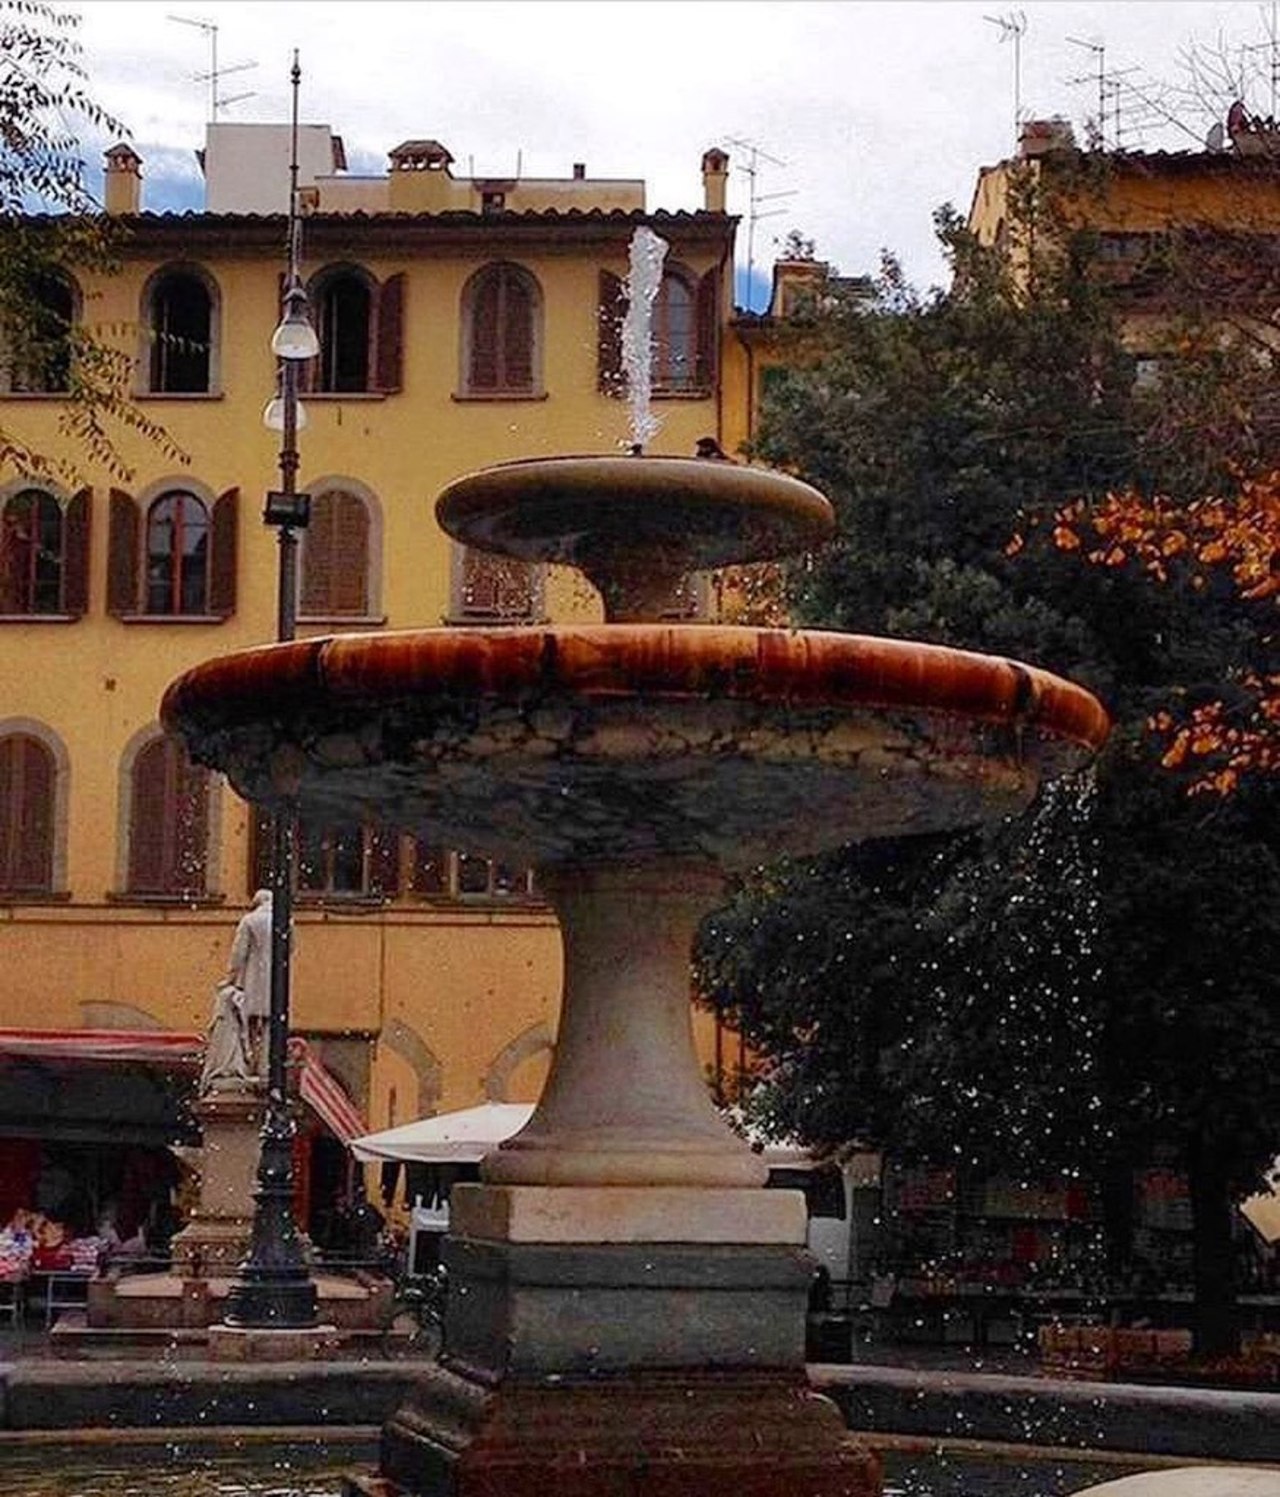 Our neighborhood: Piazza Santo Spirito. #vacationrental now available for rent. Links to our website & AIRBNB page in bio.
.
#piazzasantospiritofirenze #oltrarno #oltrarnofiorentino #oltrarnofirenze #florence #firenze #santospirito #italy #vacationtime #vacationtime #vacationrentals #airbnb #vacationhomes #airbnbflorence #vacationhome #ig_florence #ig_firenze #igerflorence #igerfirenze .
.
visit us at www.aptoltrarno.wix.com/home